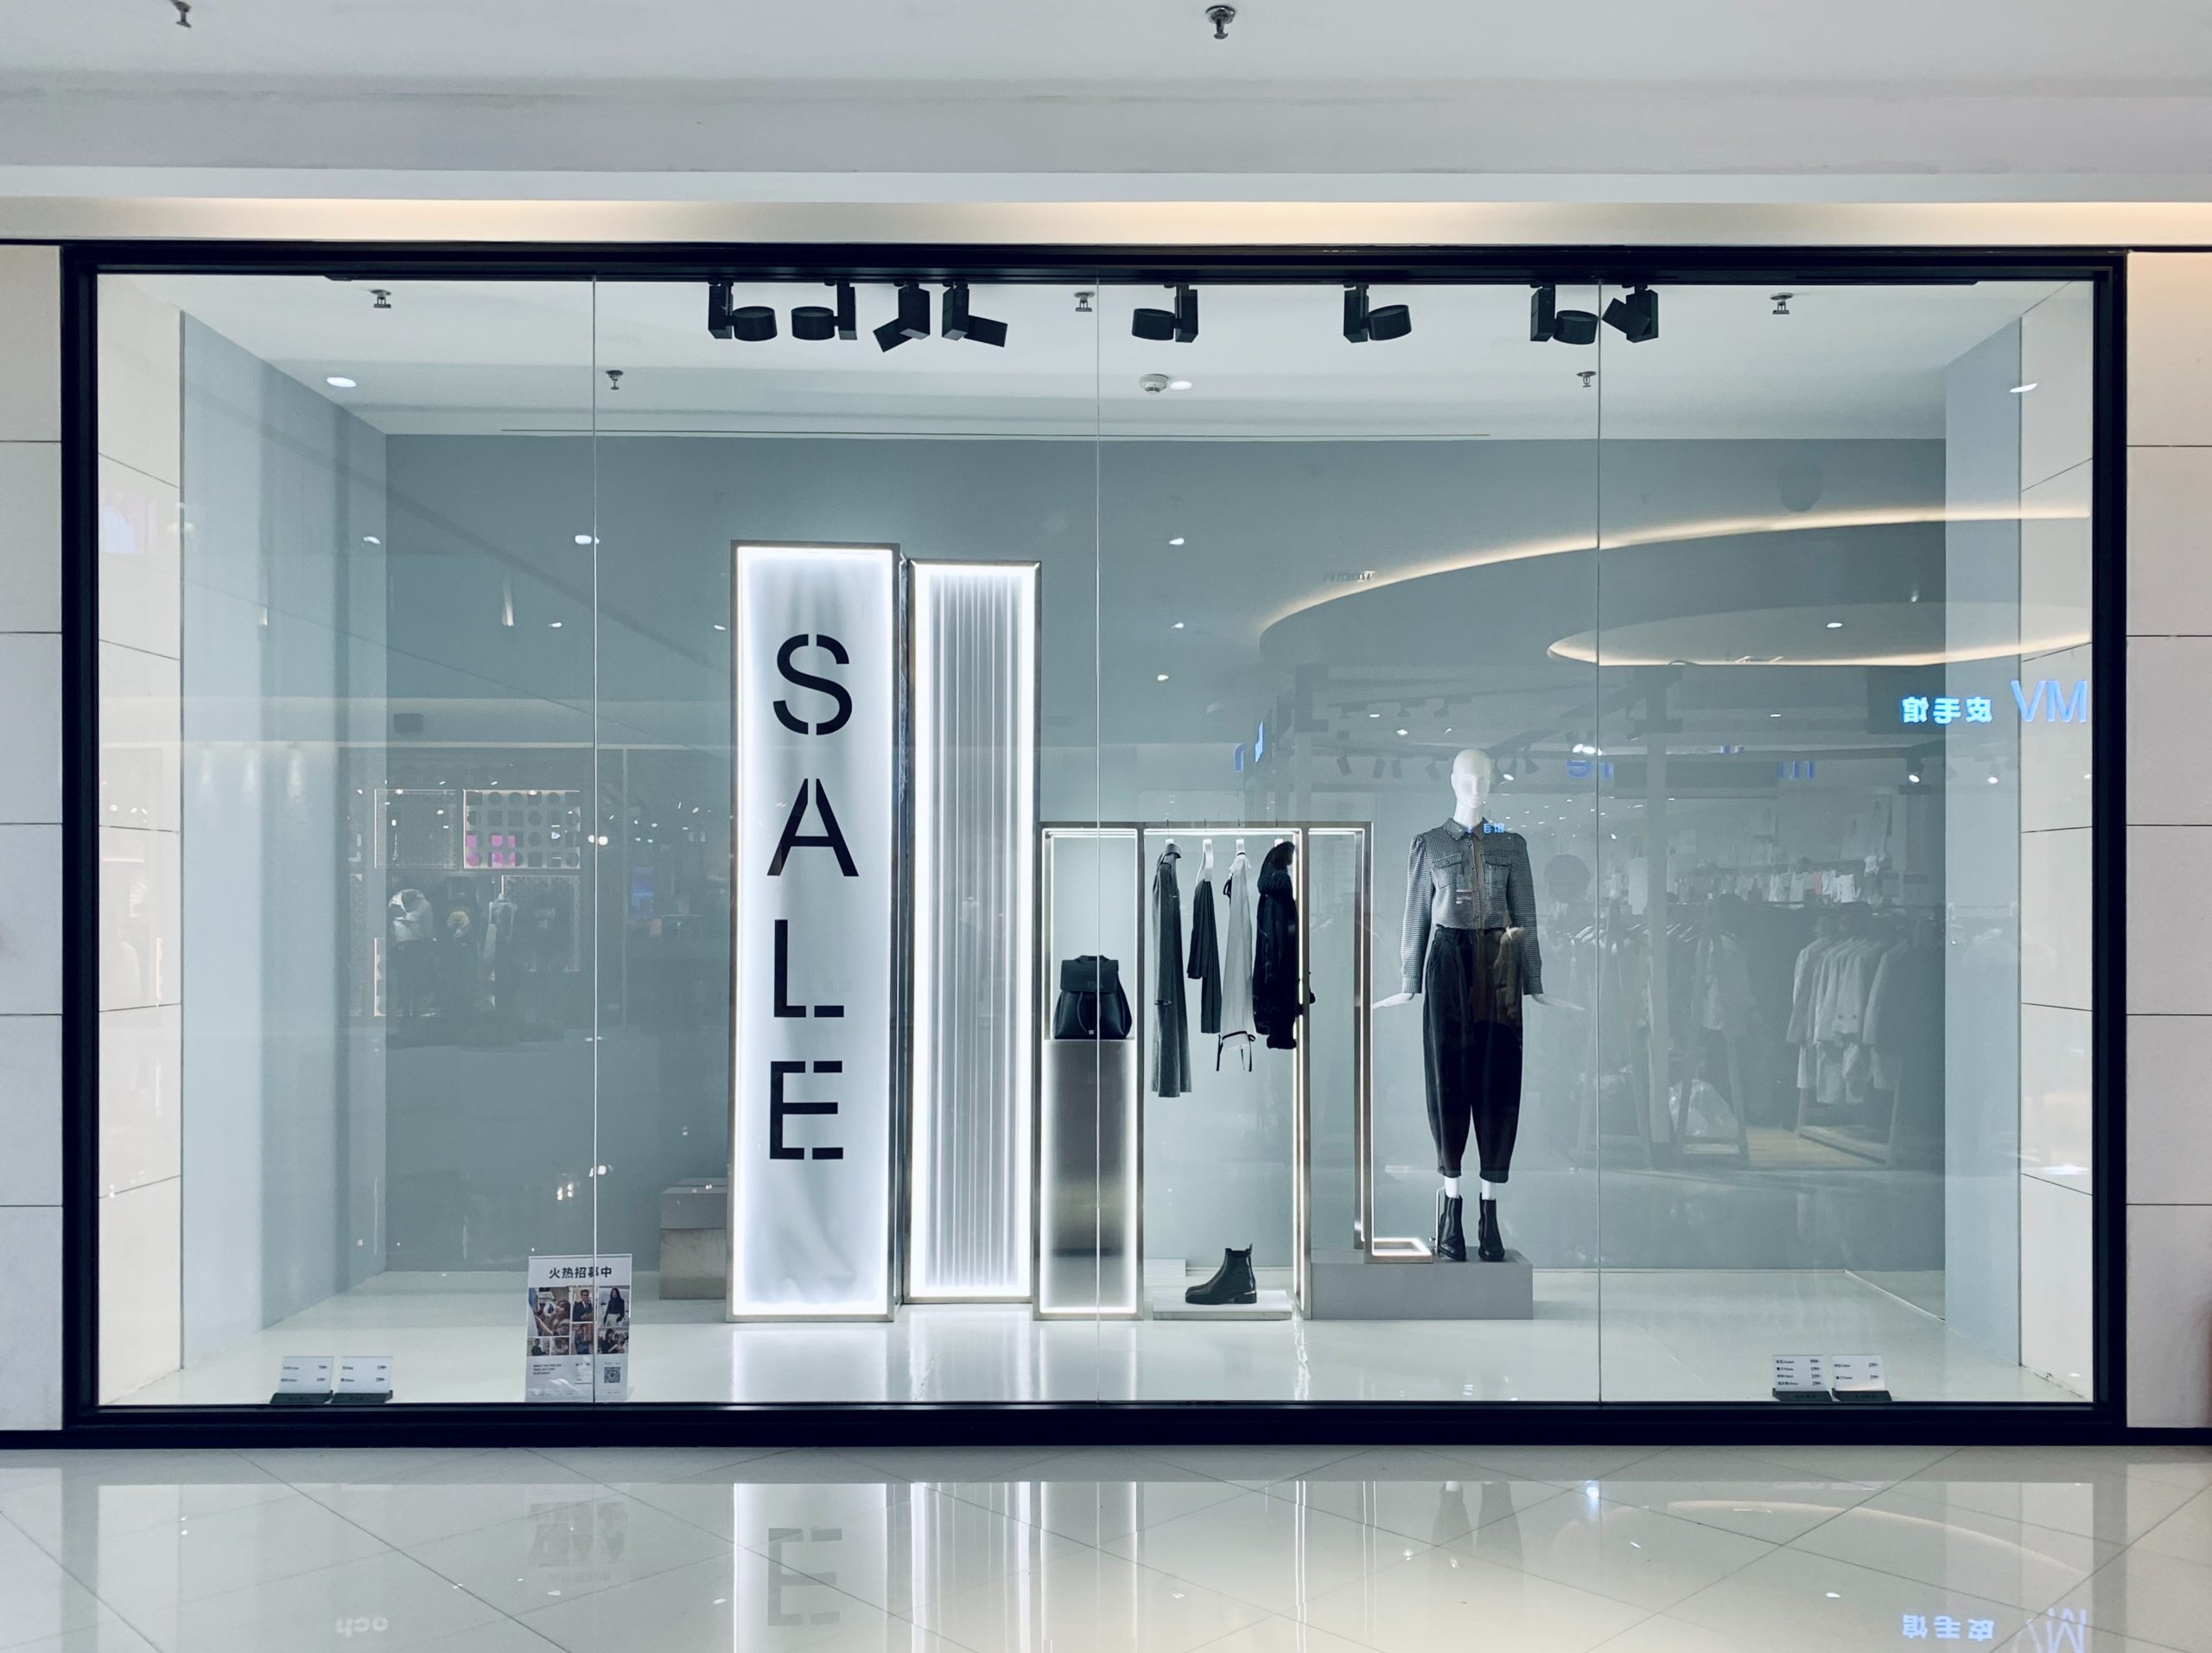 15 retail window display ideas to attract potential customers (2022)